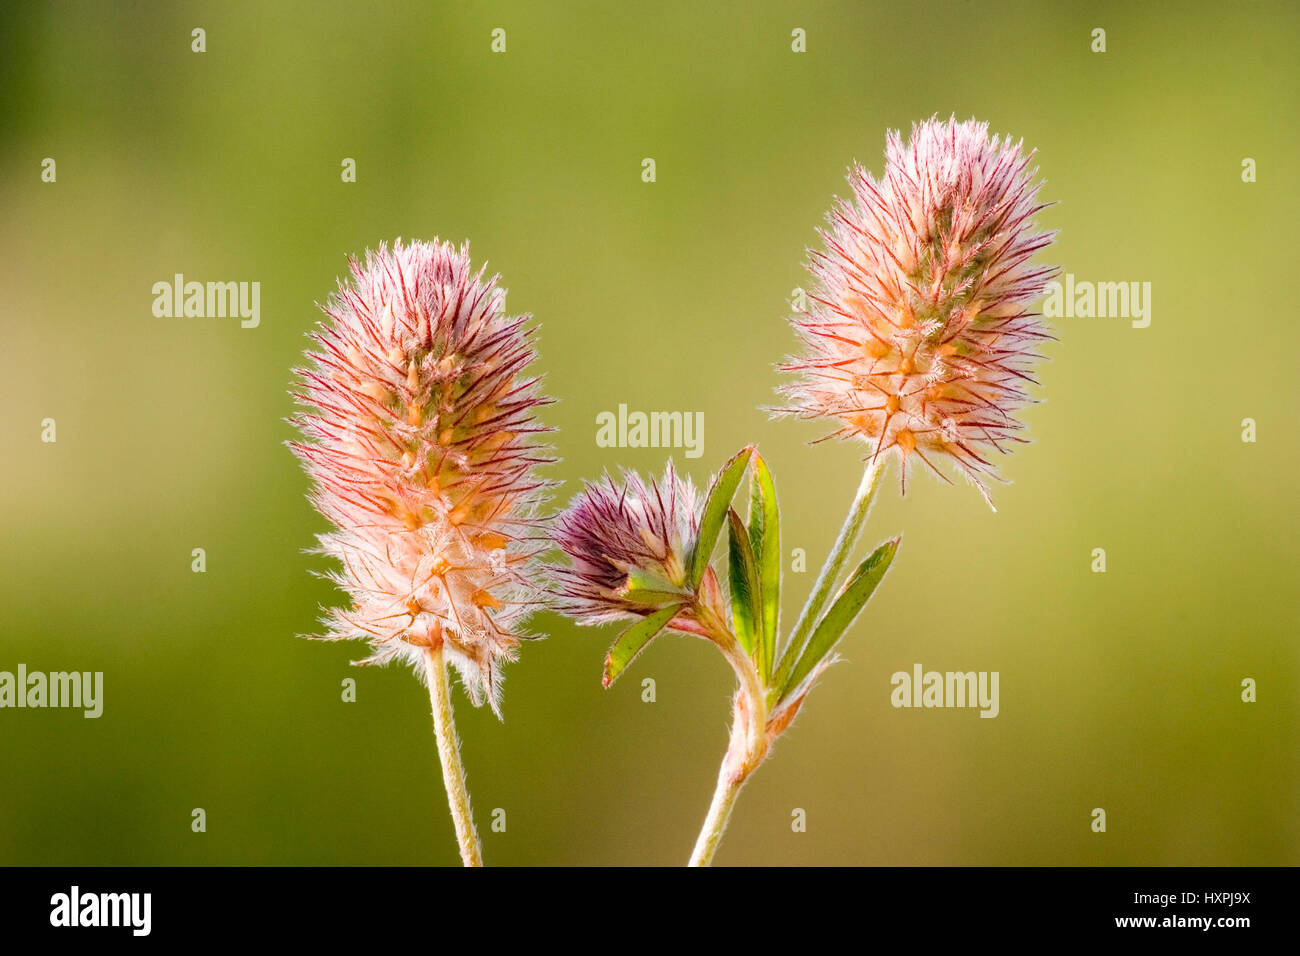 'Hare's clover; Trifolium arvense; helps against failure, family of the legumes (Fabaceae)', Hasenklee; Trifolium arvense; hilft gegen Durchfall,Famil Stock Photo